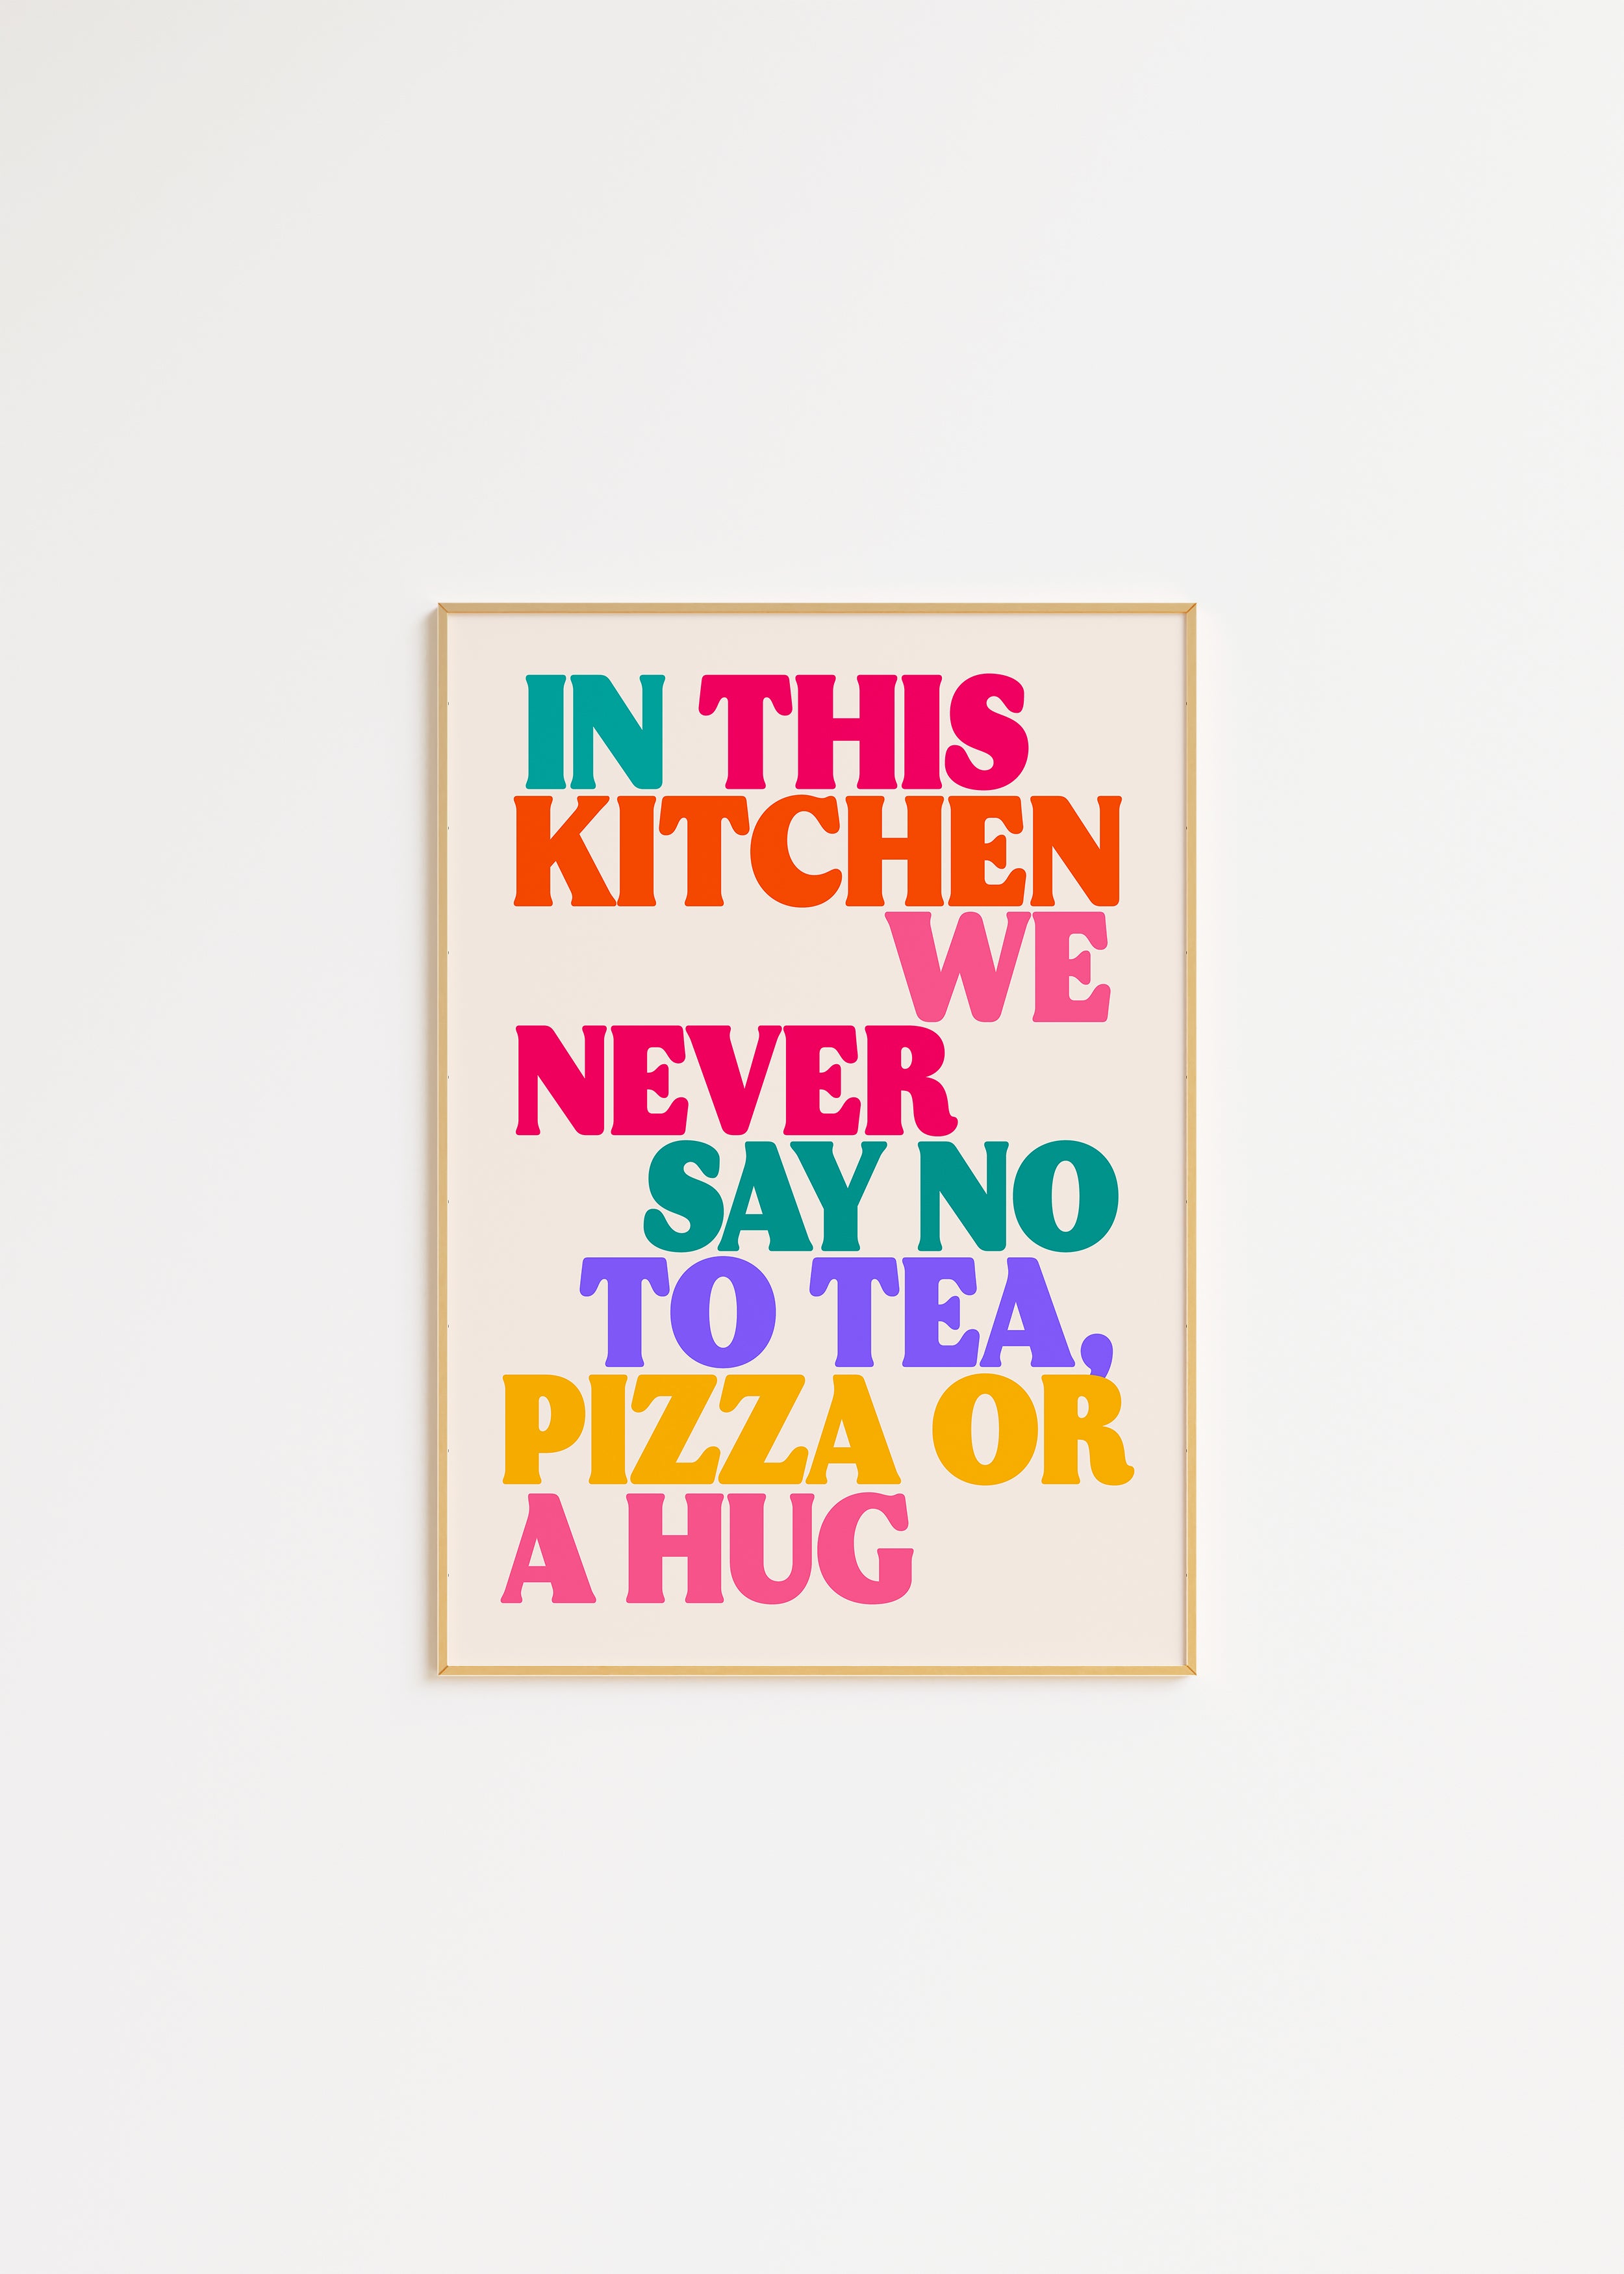 In This Kitchen We Never Say No To Tea, Pizza or a Hug in Yellow Print A3